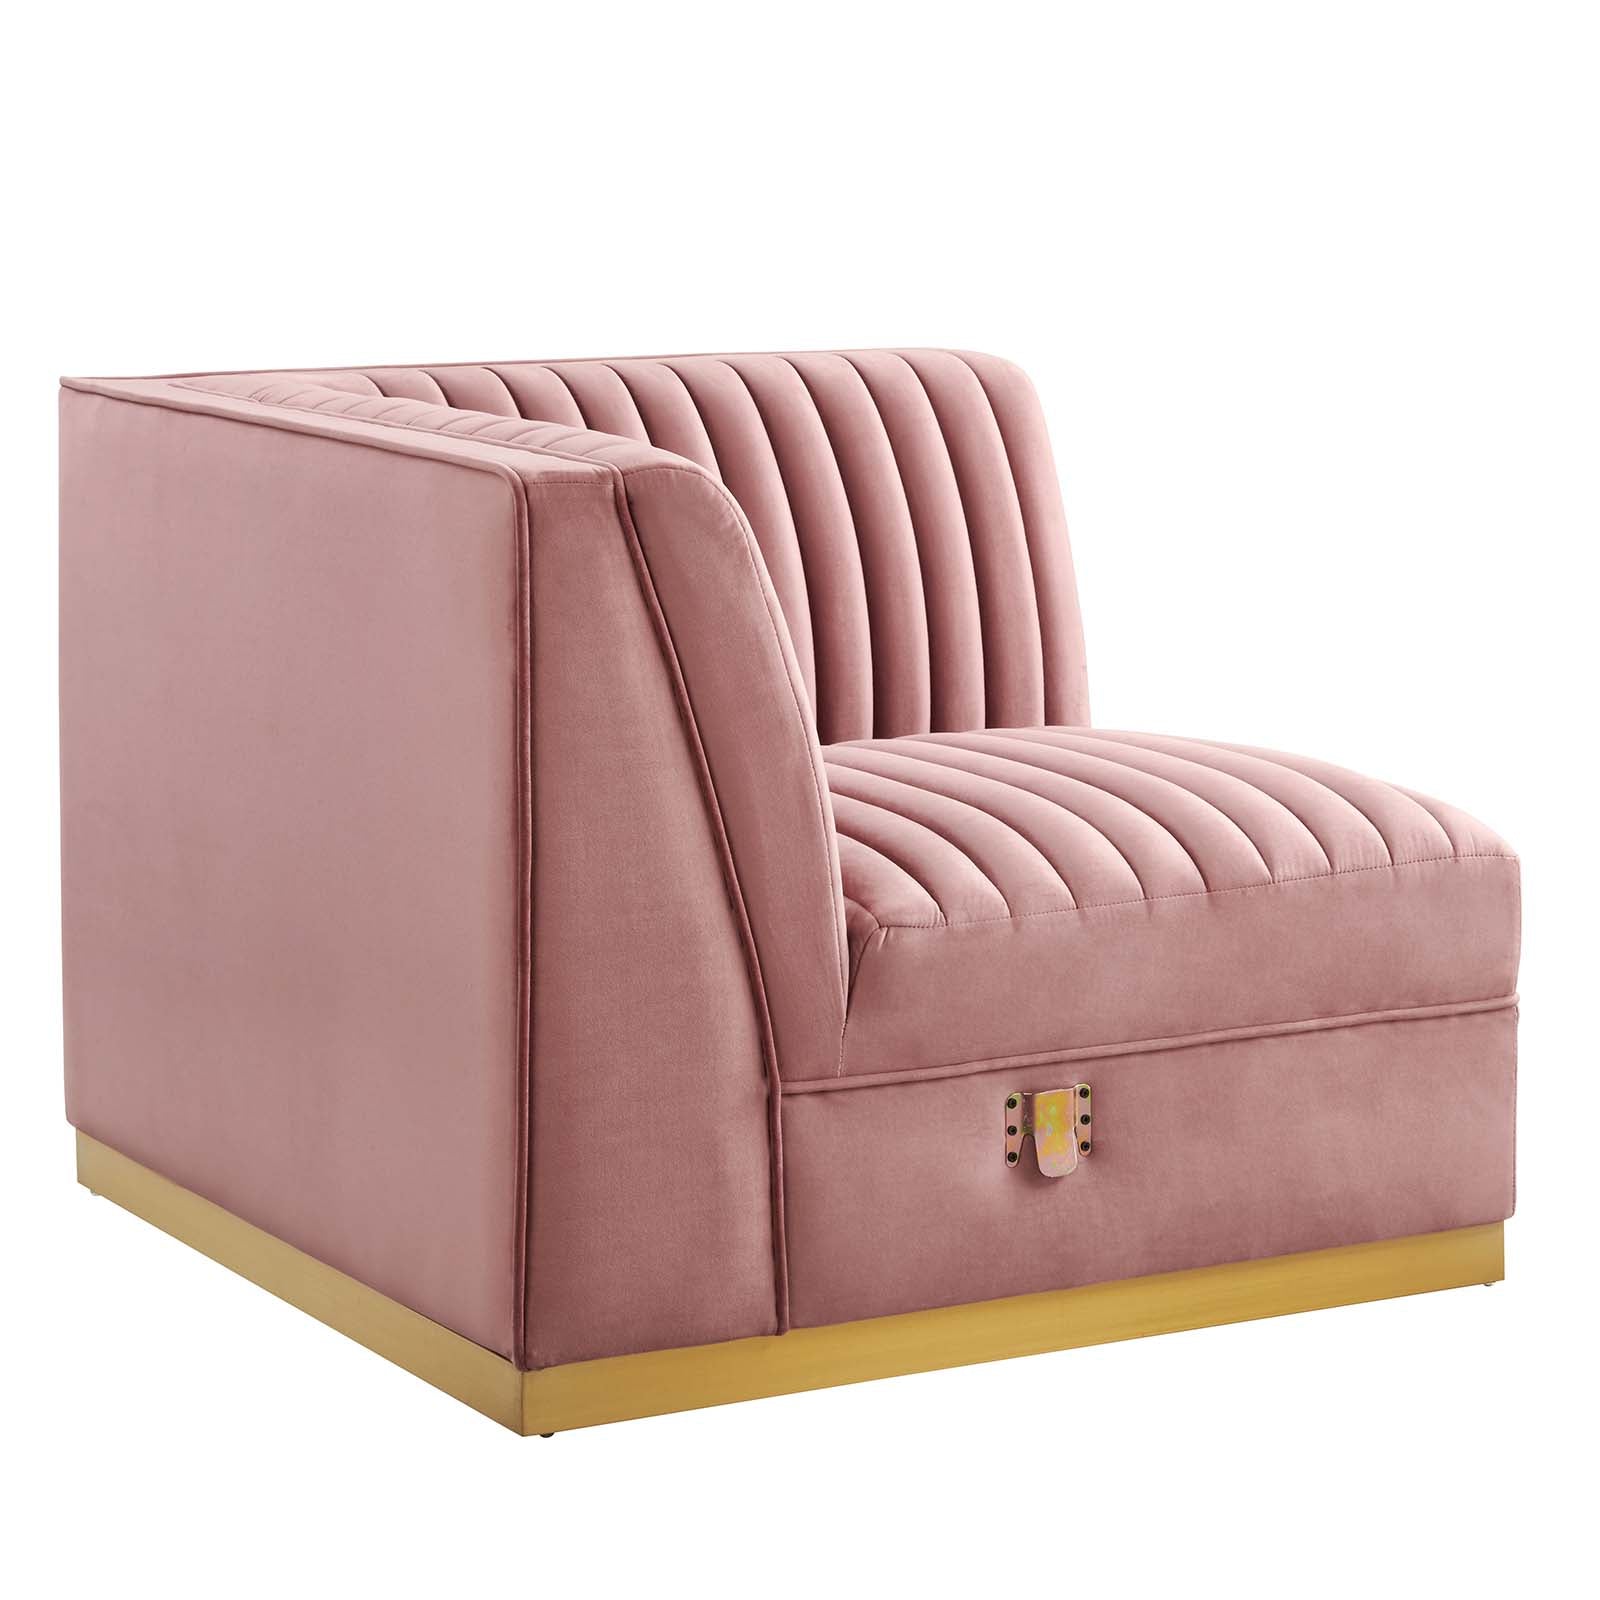 Modway Accent Chairs - Sanguine Channel Tufted Performance Velvet Modular Sectional Sofa Left Corner Chair Dusty Rose